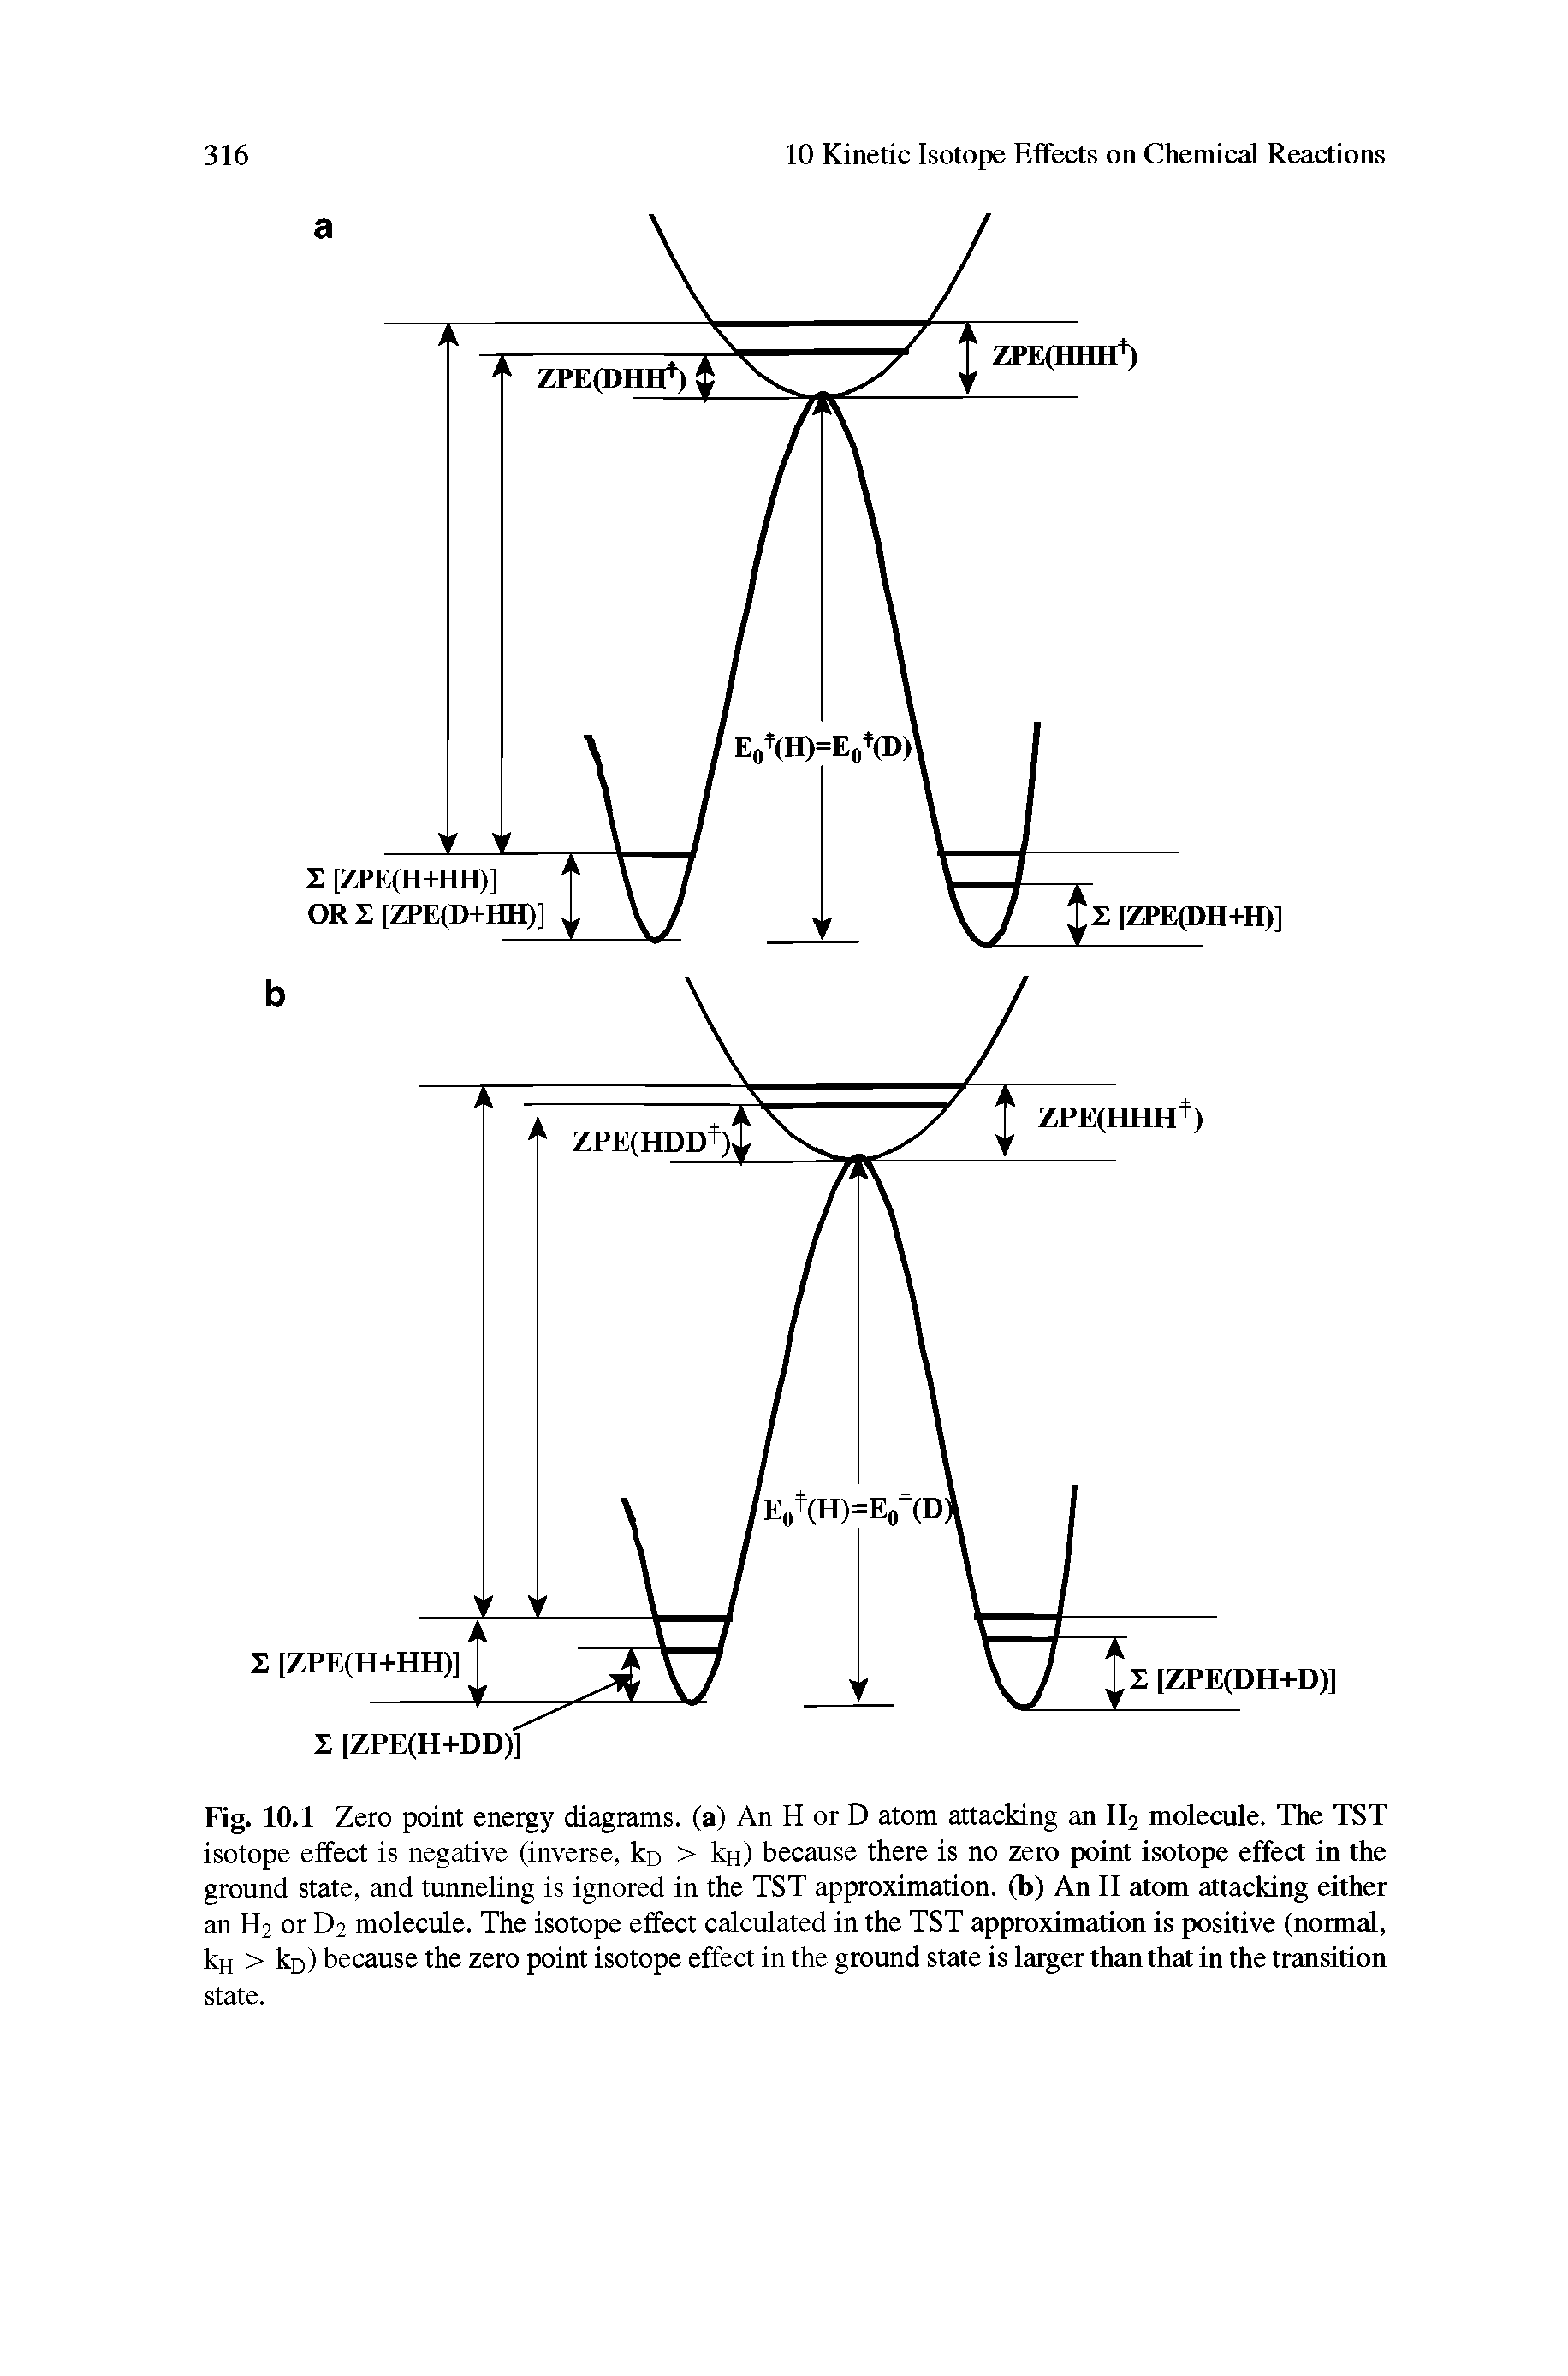 Fig. 10.1 Zero point energy diagrams, (a) An H or D atom attacking an H2 molecule. The TST isotope effect is negative (inverse, kn > kn) because there is no zero point isotope effect in the ground state, and tunneling is ignored in the TST approximation, (b) An H atom attacking either an H2 or D2 molecule. The isotope effect calculated in the TST approximation is positive (normal, kH > kn) because the zero point isotope effect in the ground state is larger than that in the transition state.